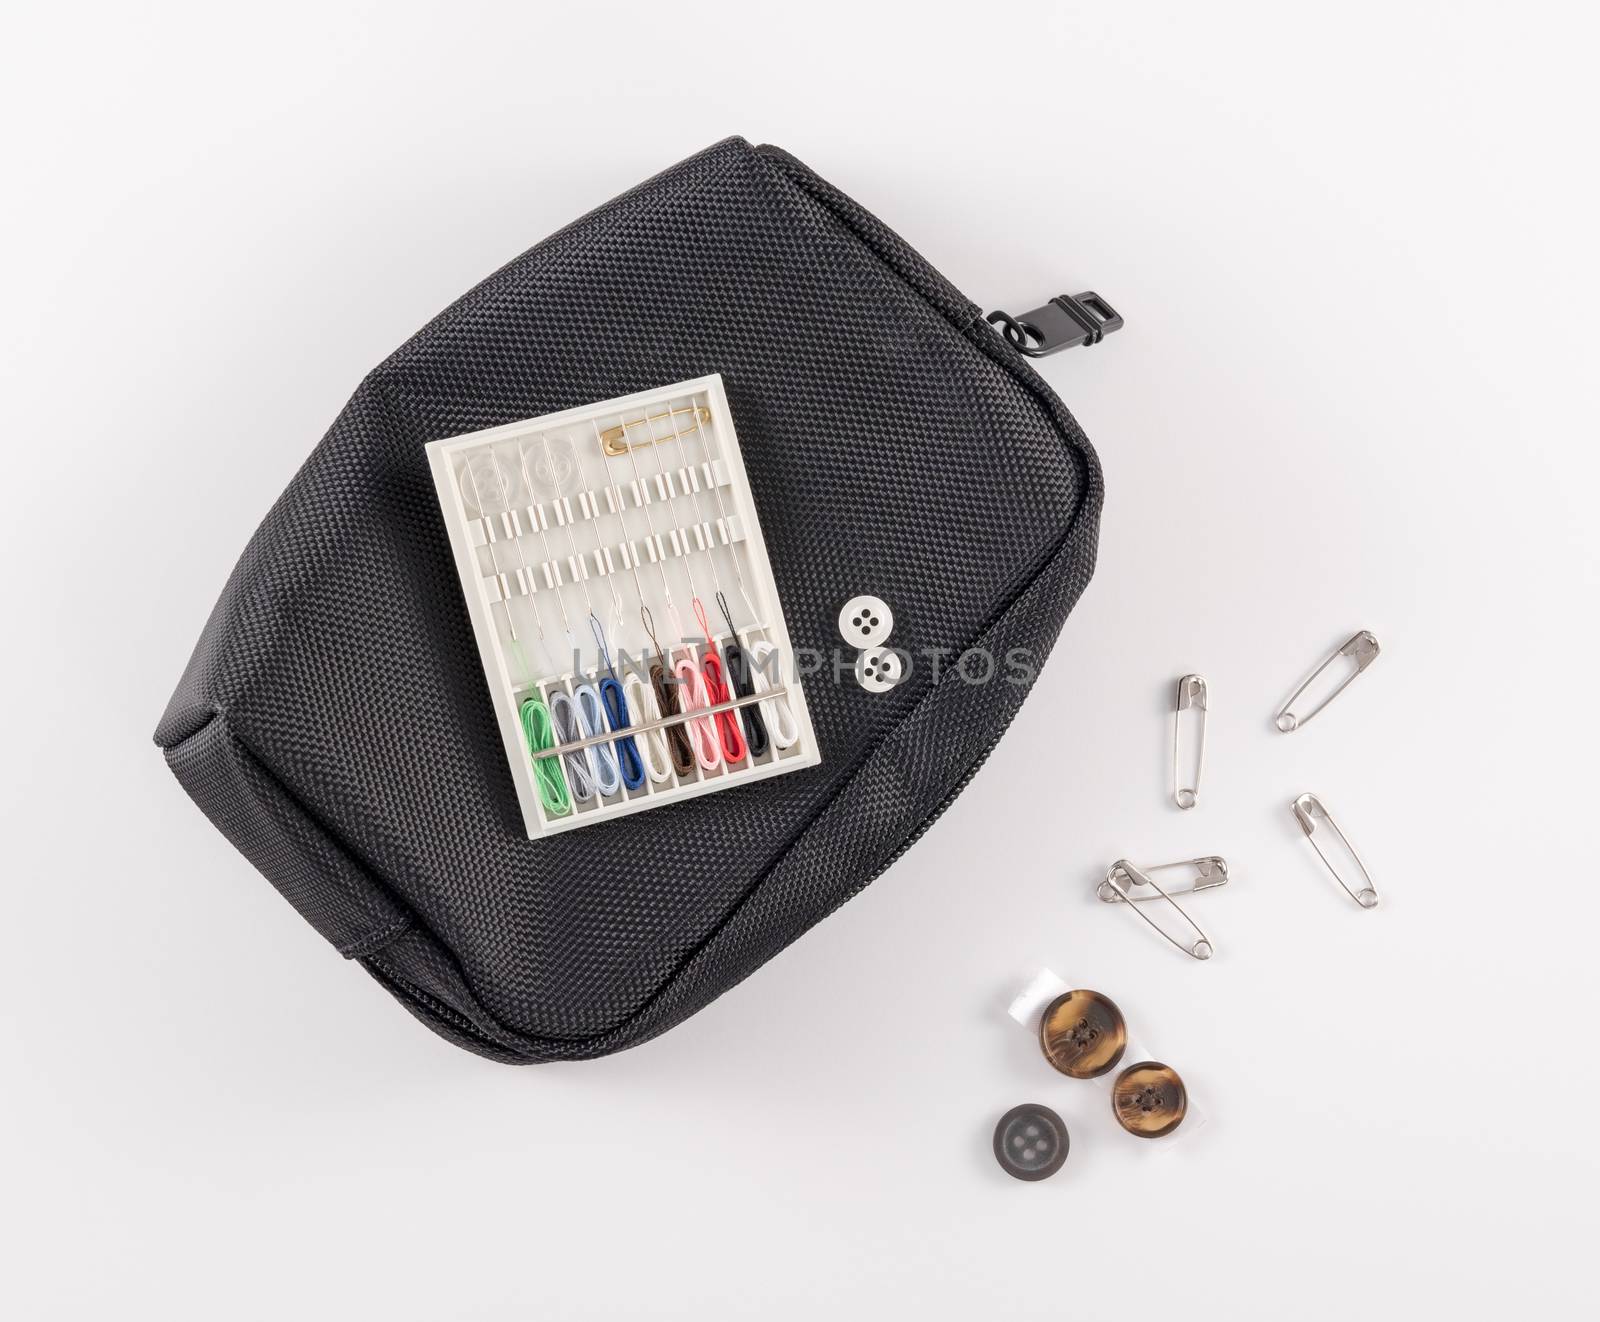 Travel sewing kit with black care, buttons, and safety pins on white background